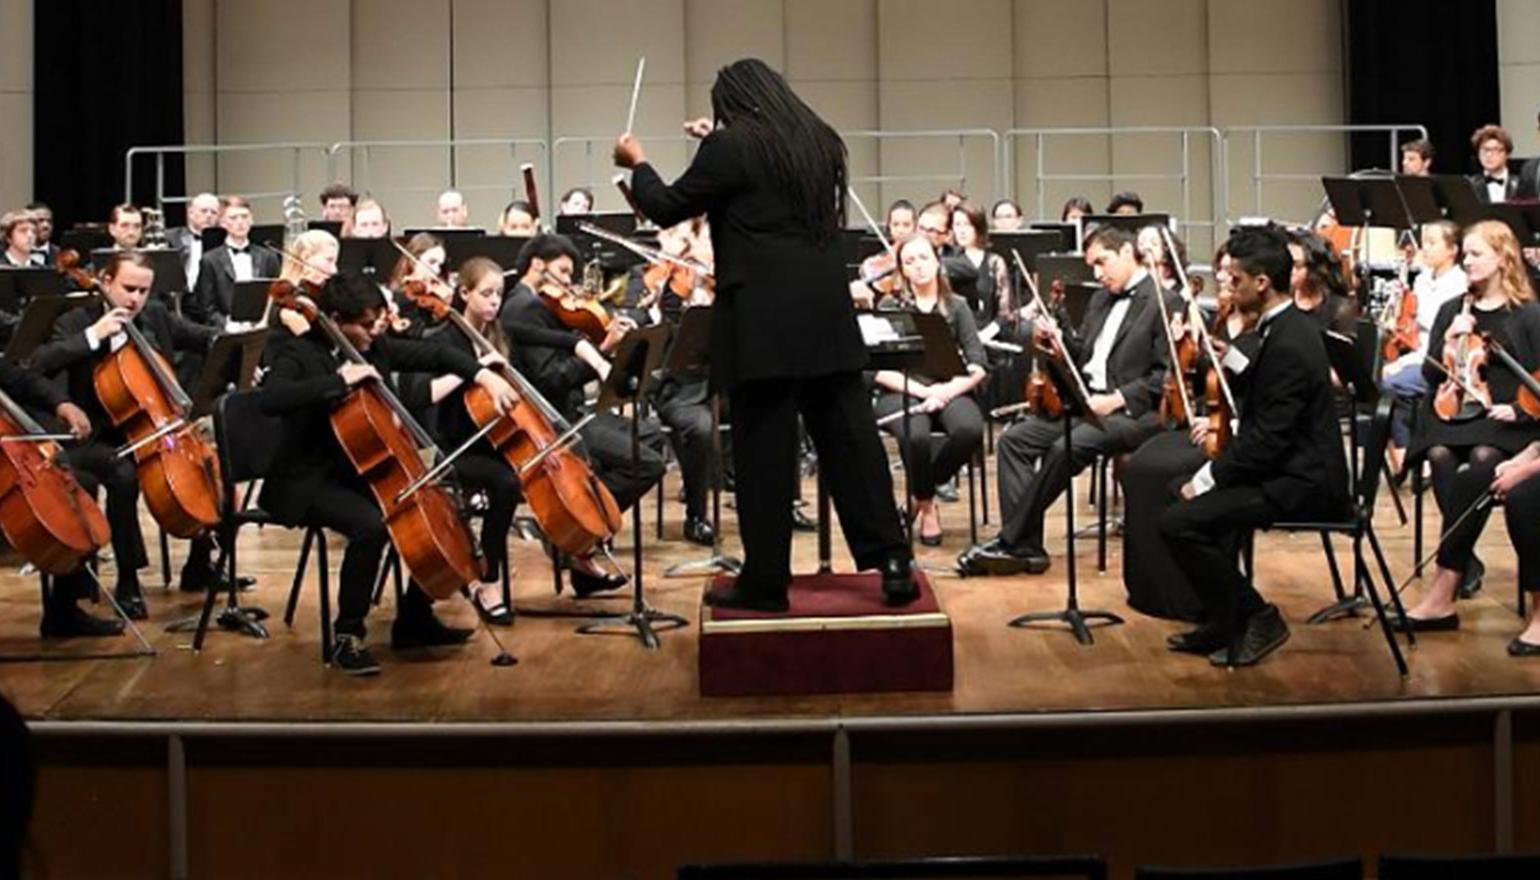 Orchestra and conductor from audience